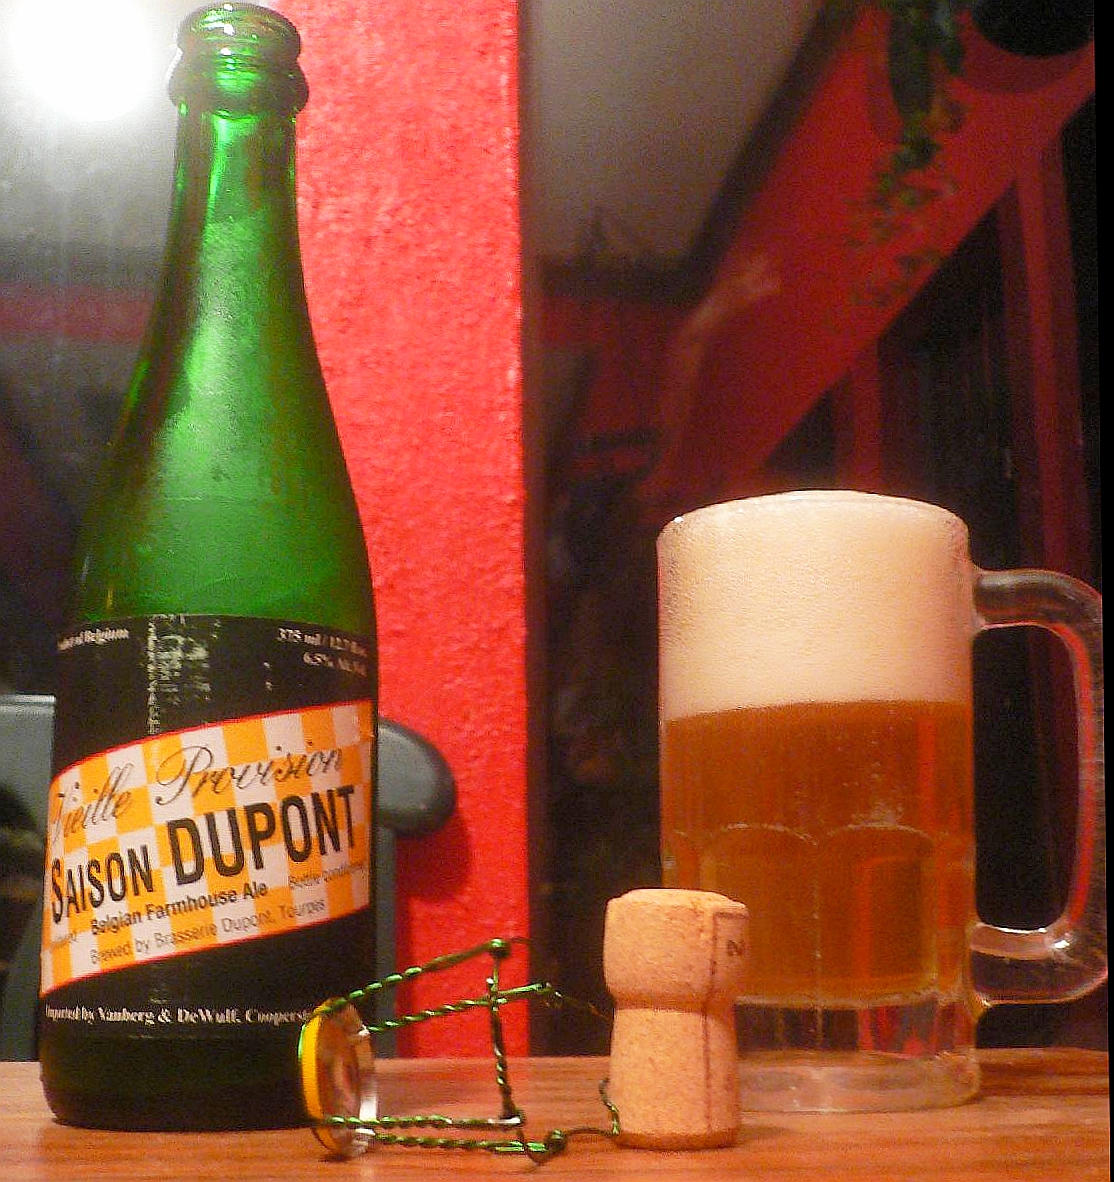 A bottle of Saison Dupont and glass